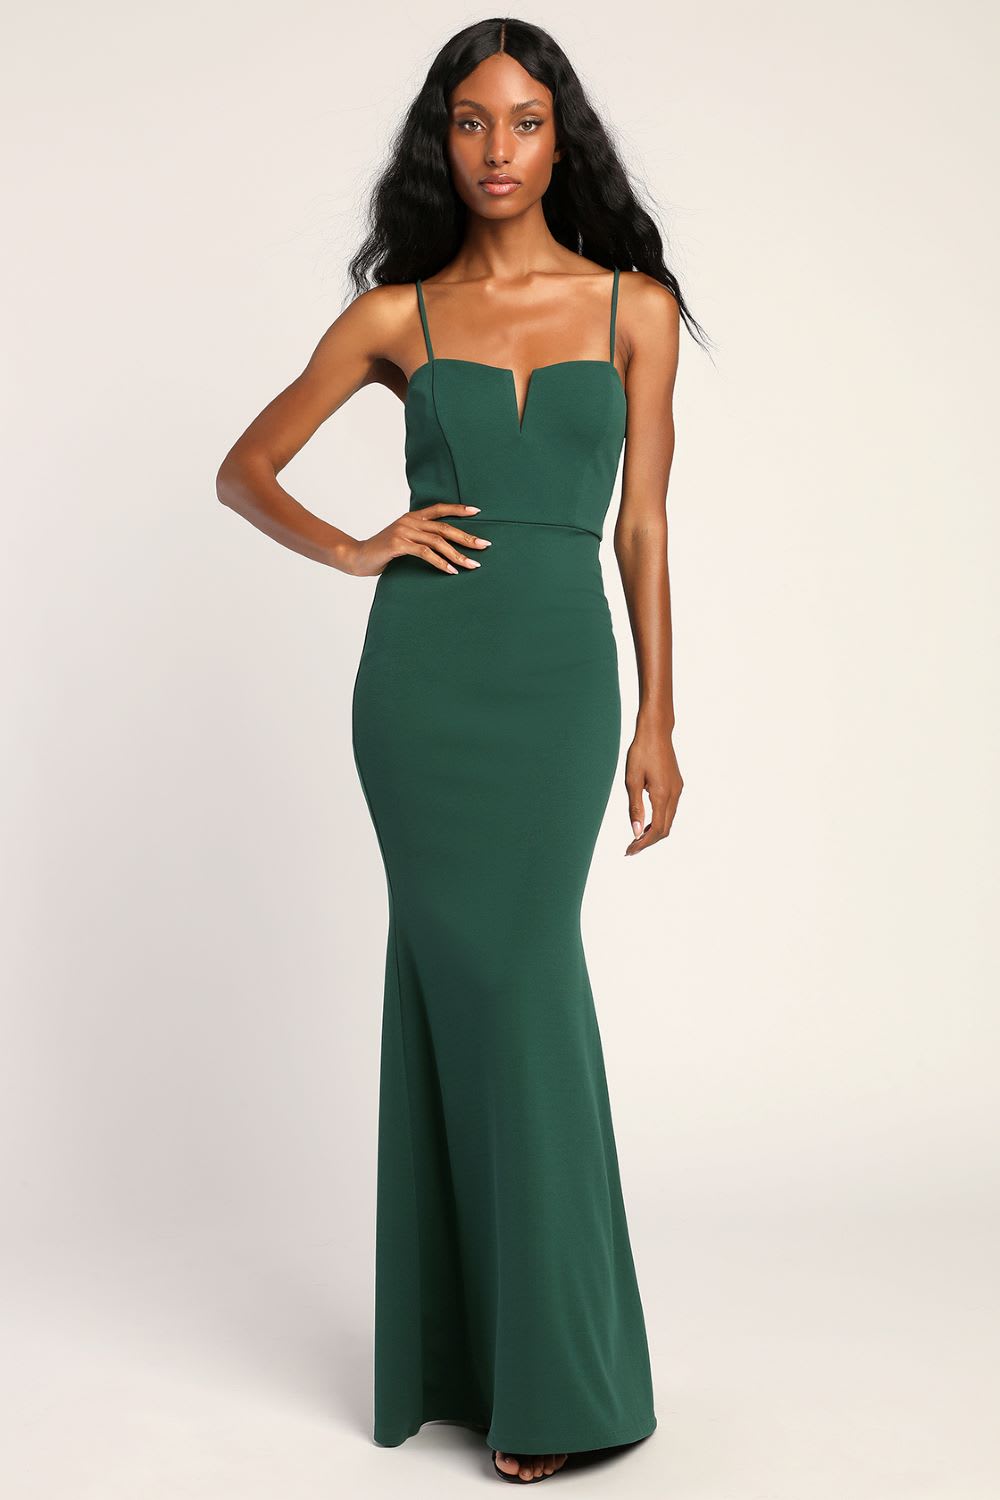 What To Wear When The Invite Says Black Tie Optional - Lulus.com Fashion  Blog